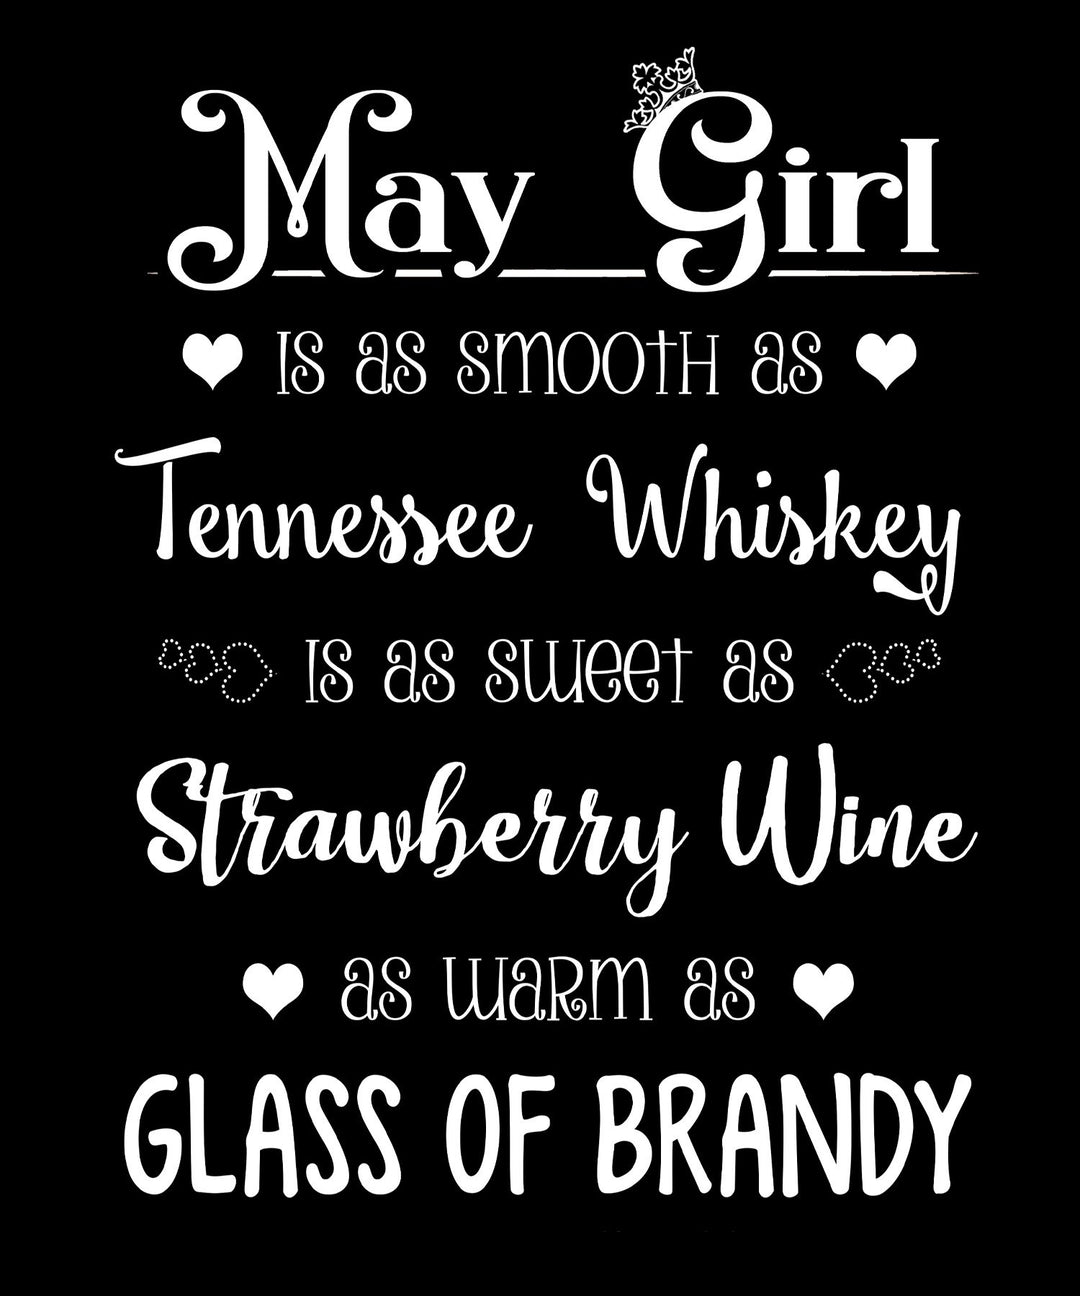 "May Girl Is As Smooth As Whiskey.........As Warm As Brandy"